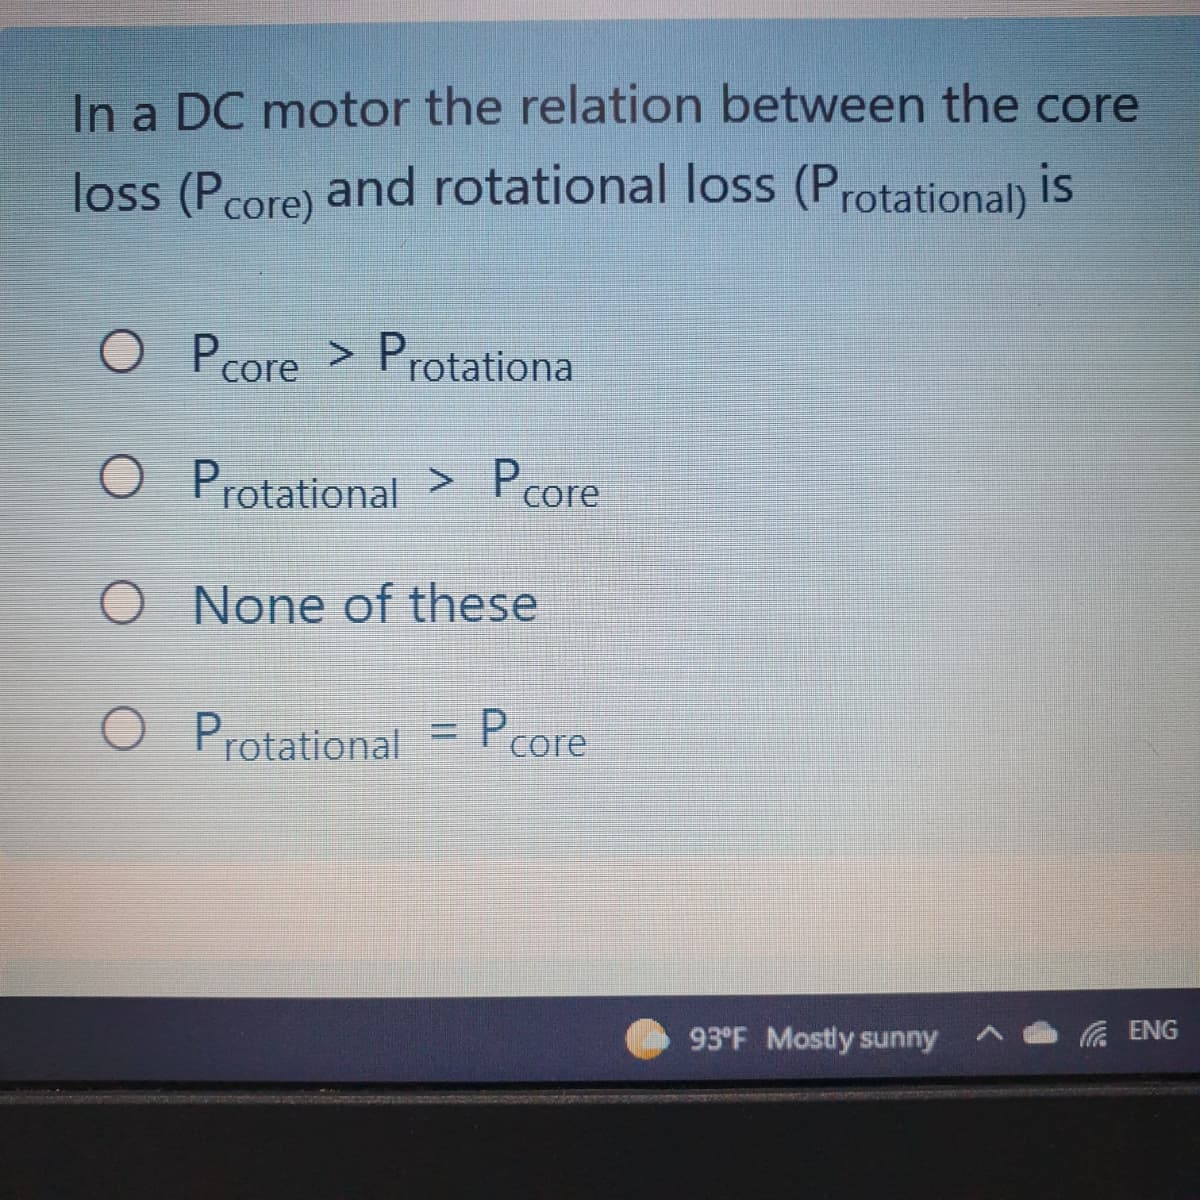 In a DC motor the relation between the core
loss (Pcore) and rotational loss (Protational) is
O P core > Protationa
O Protational > Pcore
O None of these
Protational
Pcore
93°F Mostly sunny
底 ENG
